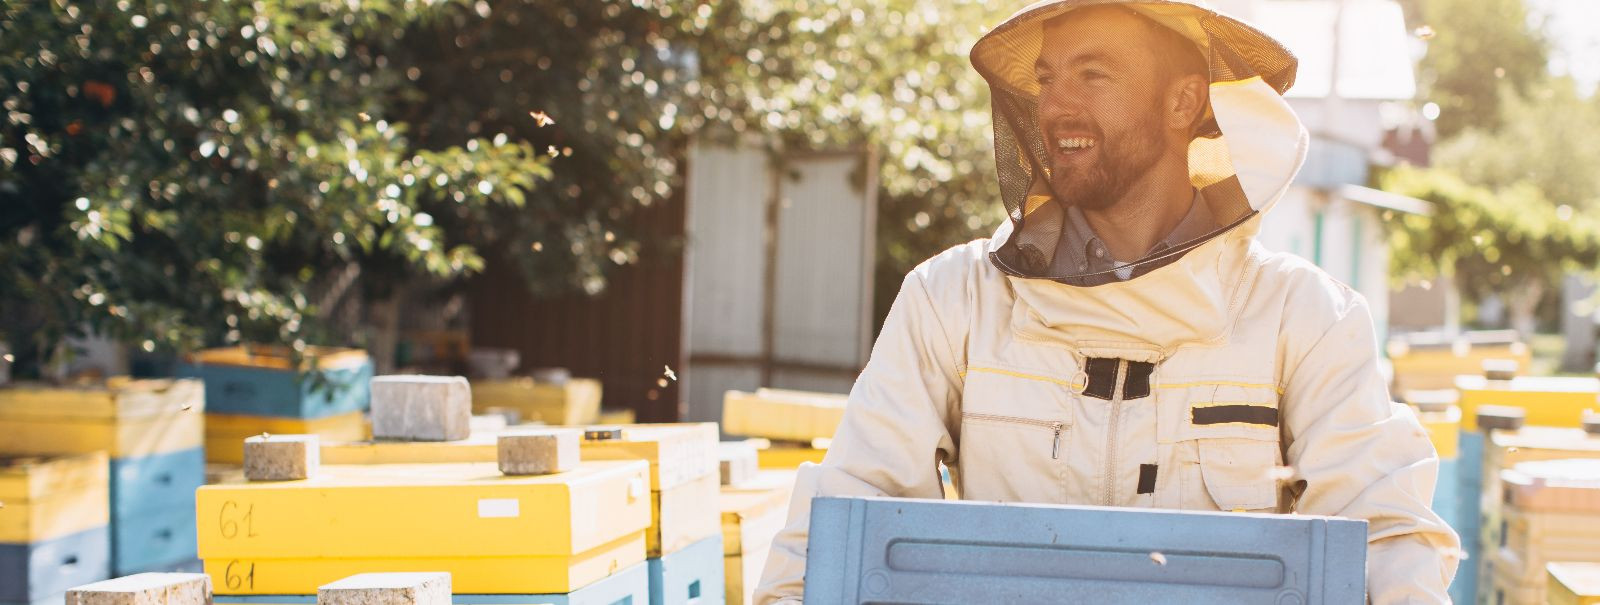 Sustainable beekeeping is an approach that emphasizes the health and welfare of bees, the quality of the honey produced, and the overall impact on the environme